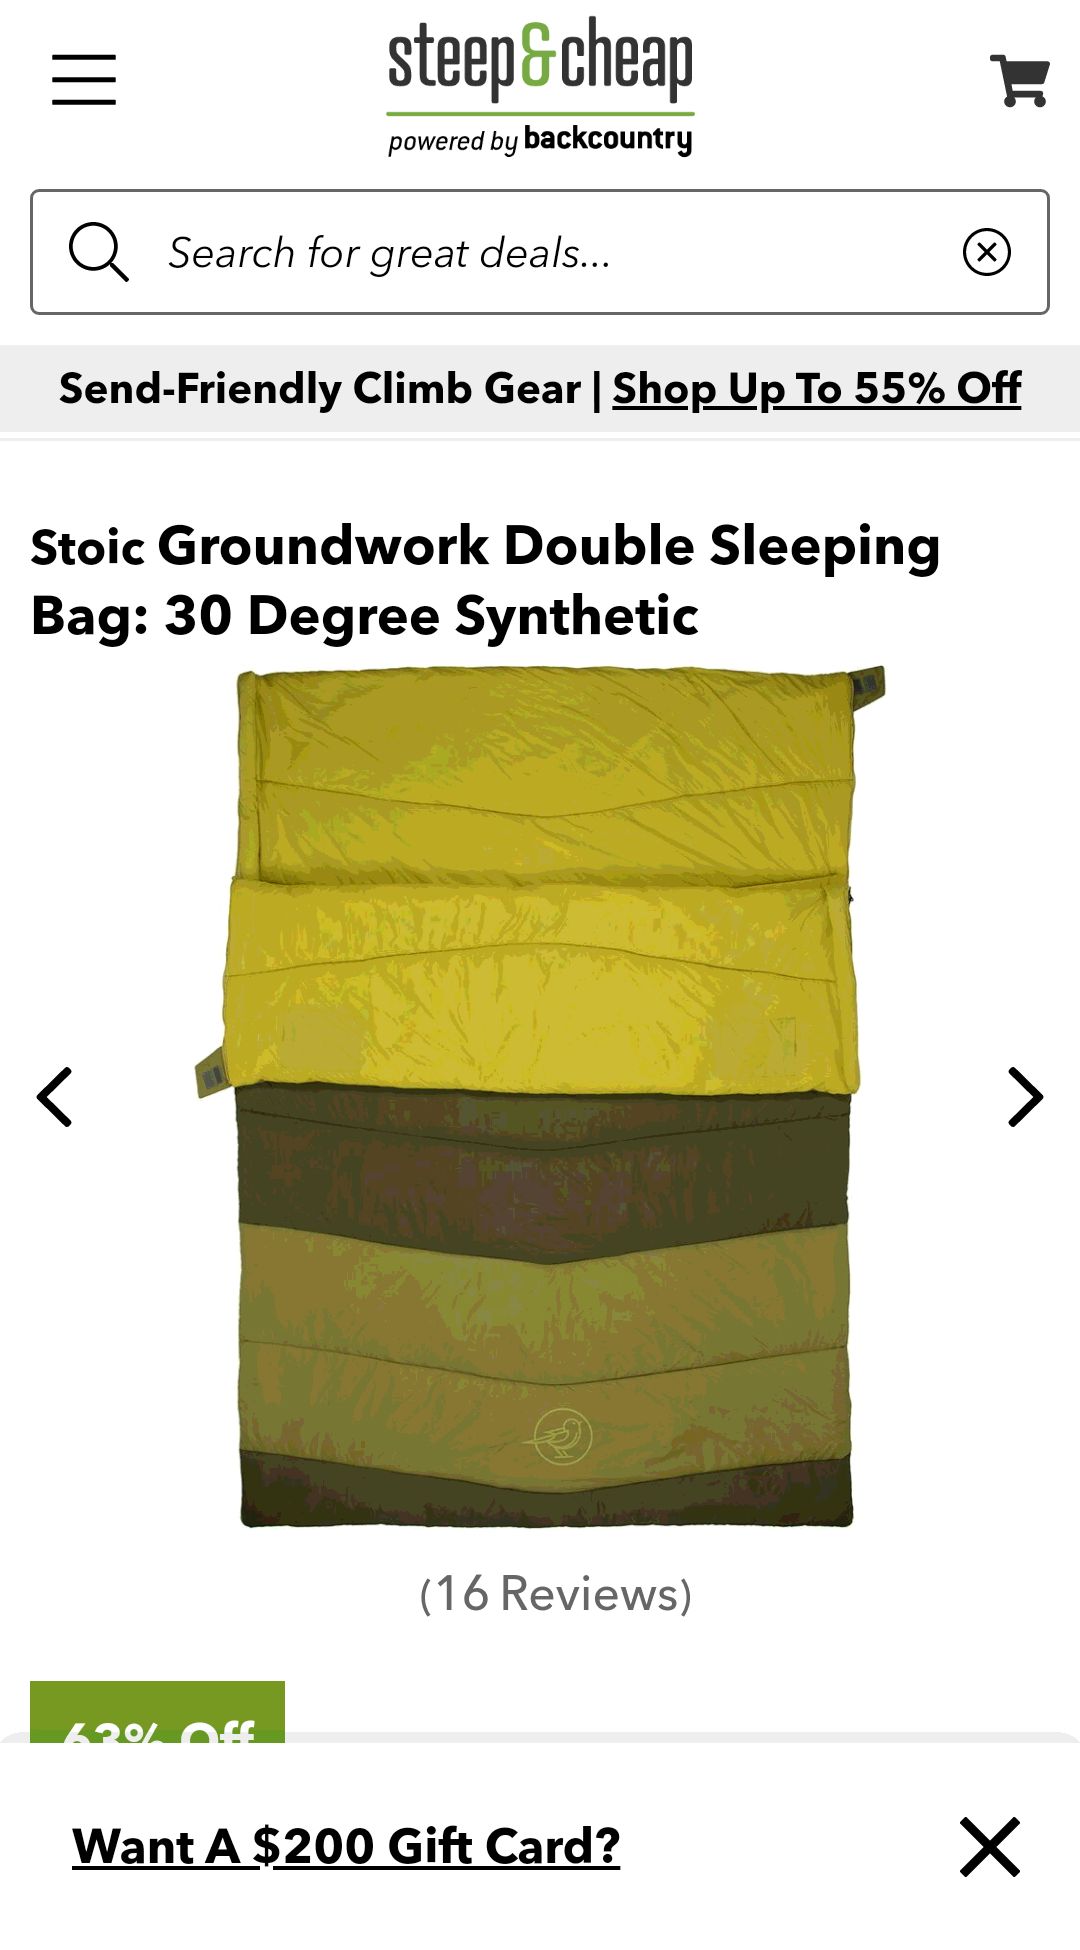 Stoic Groundwork Double Sleeping Bag: 30 Degree Synthetic | Steep & Cheap 睡袋